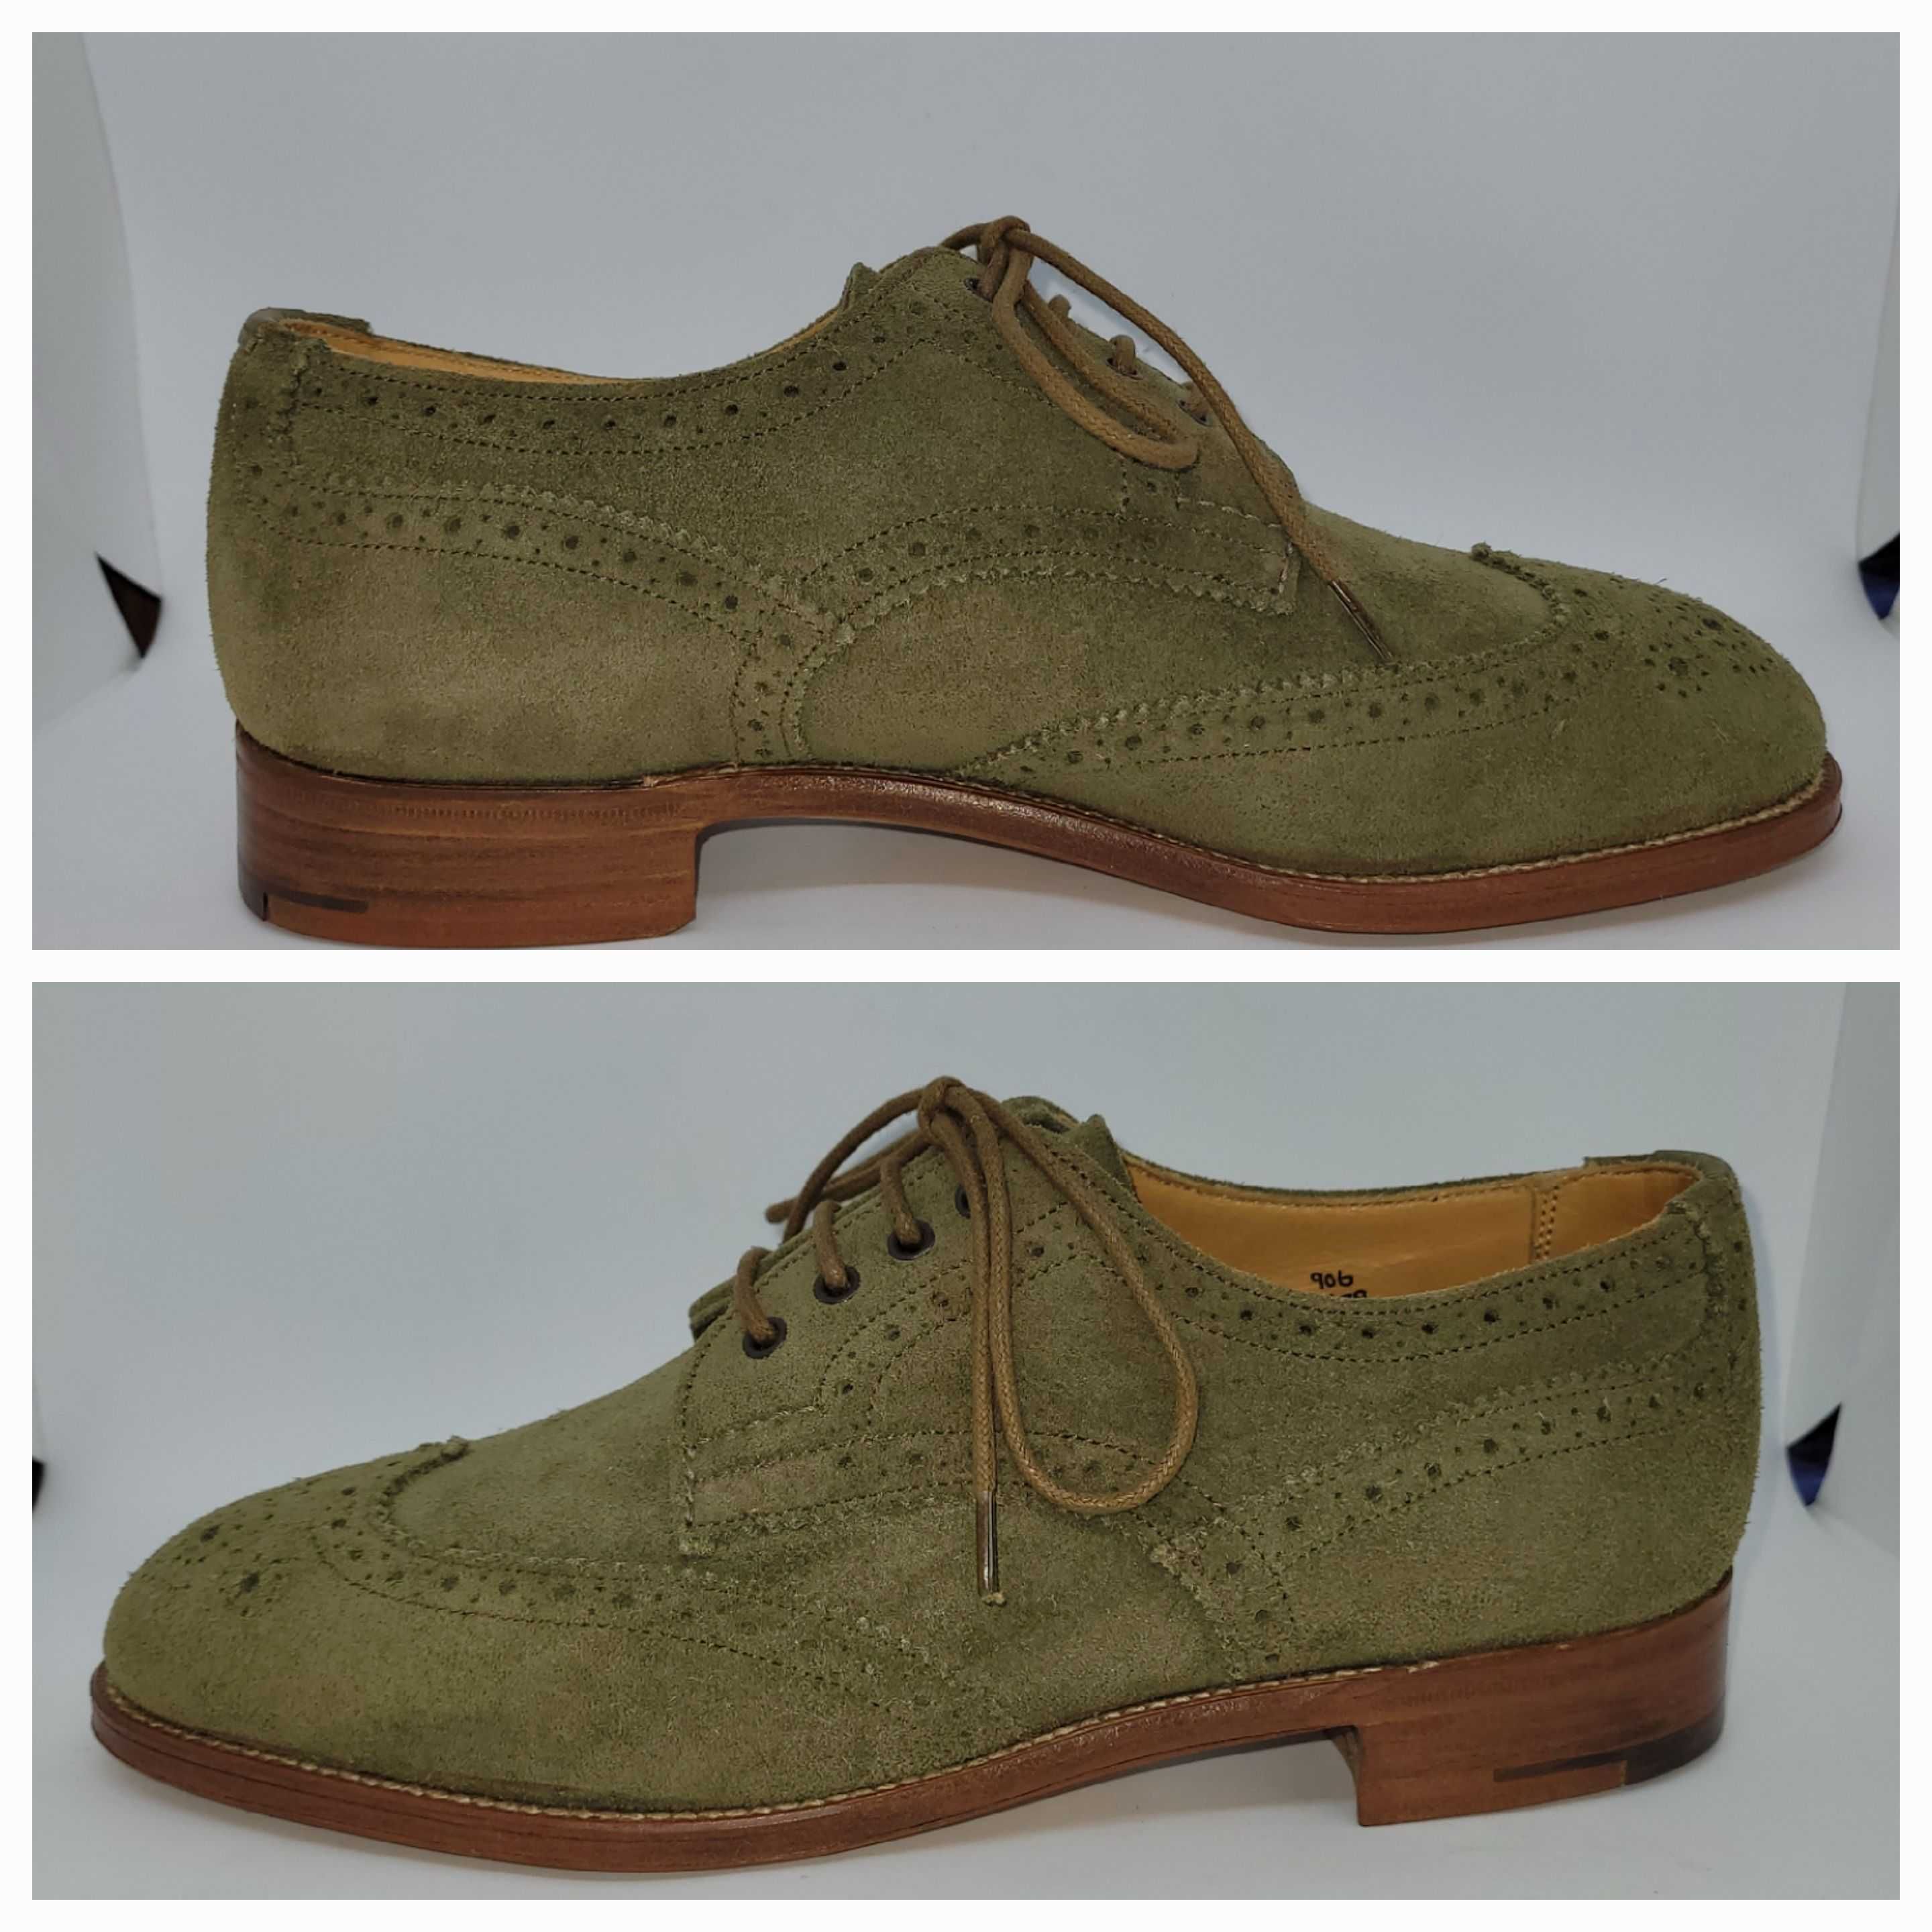 Tricker's "Anne" Brogue Country Shoe-Turf Green Suede-UK 5,5/EUR 38,5